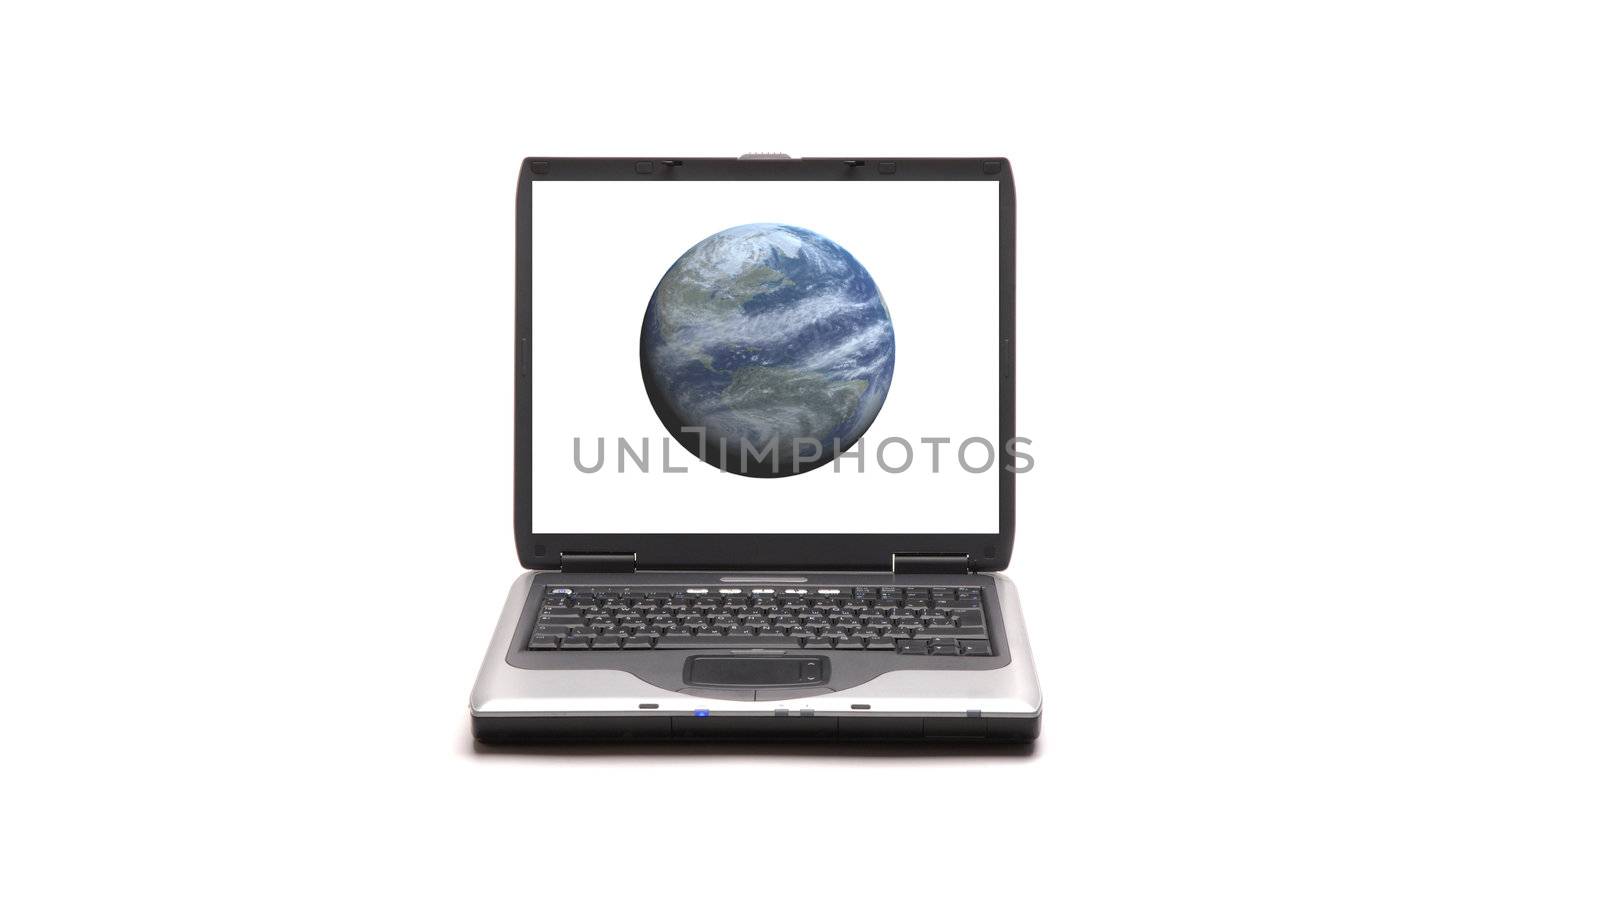 Laptop on white background whith Earth on the screen